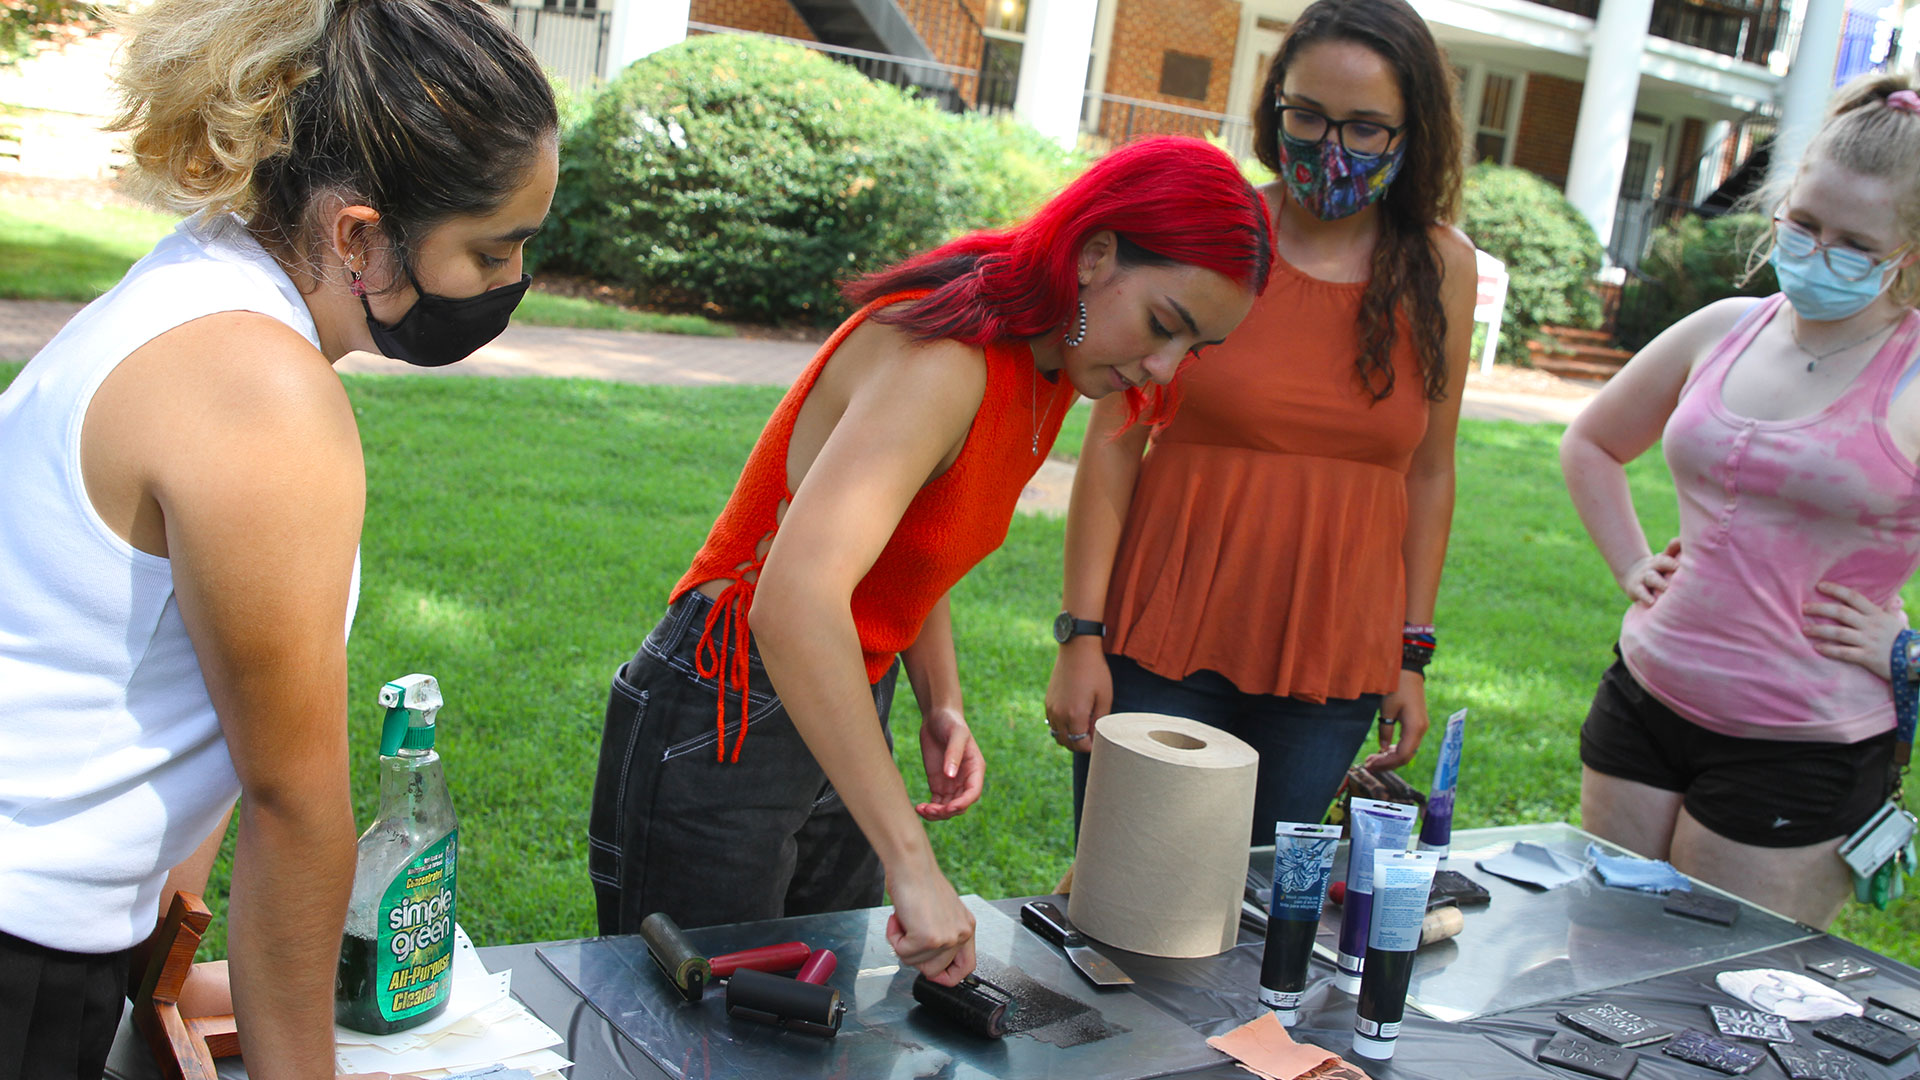 Students take turns using templates to make decals at Free Press on the Quad.